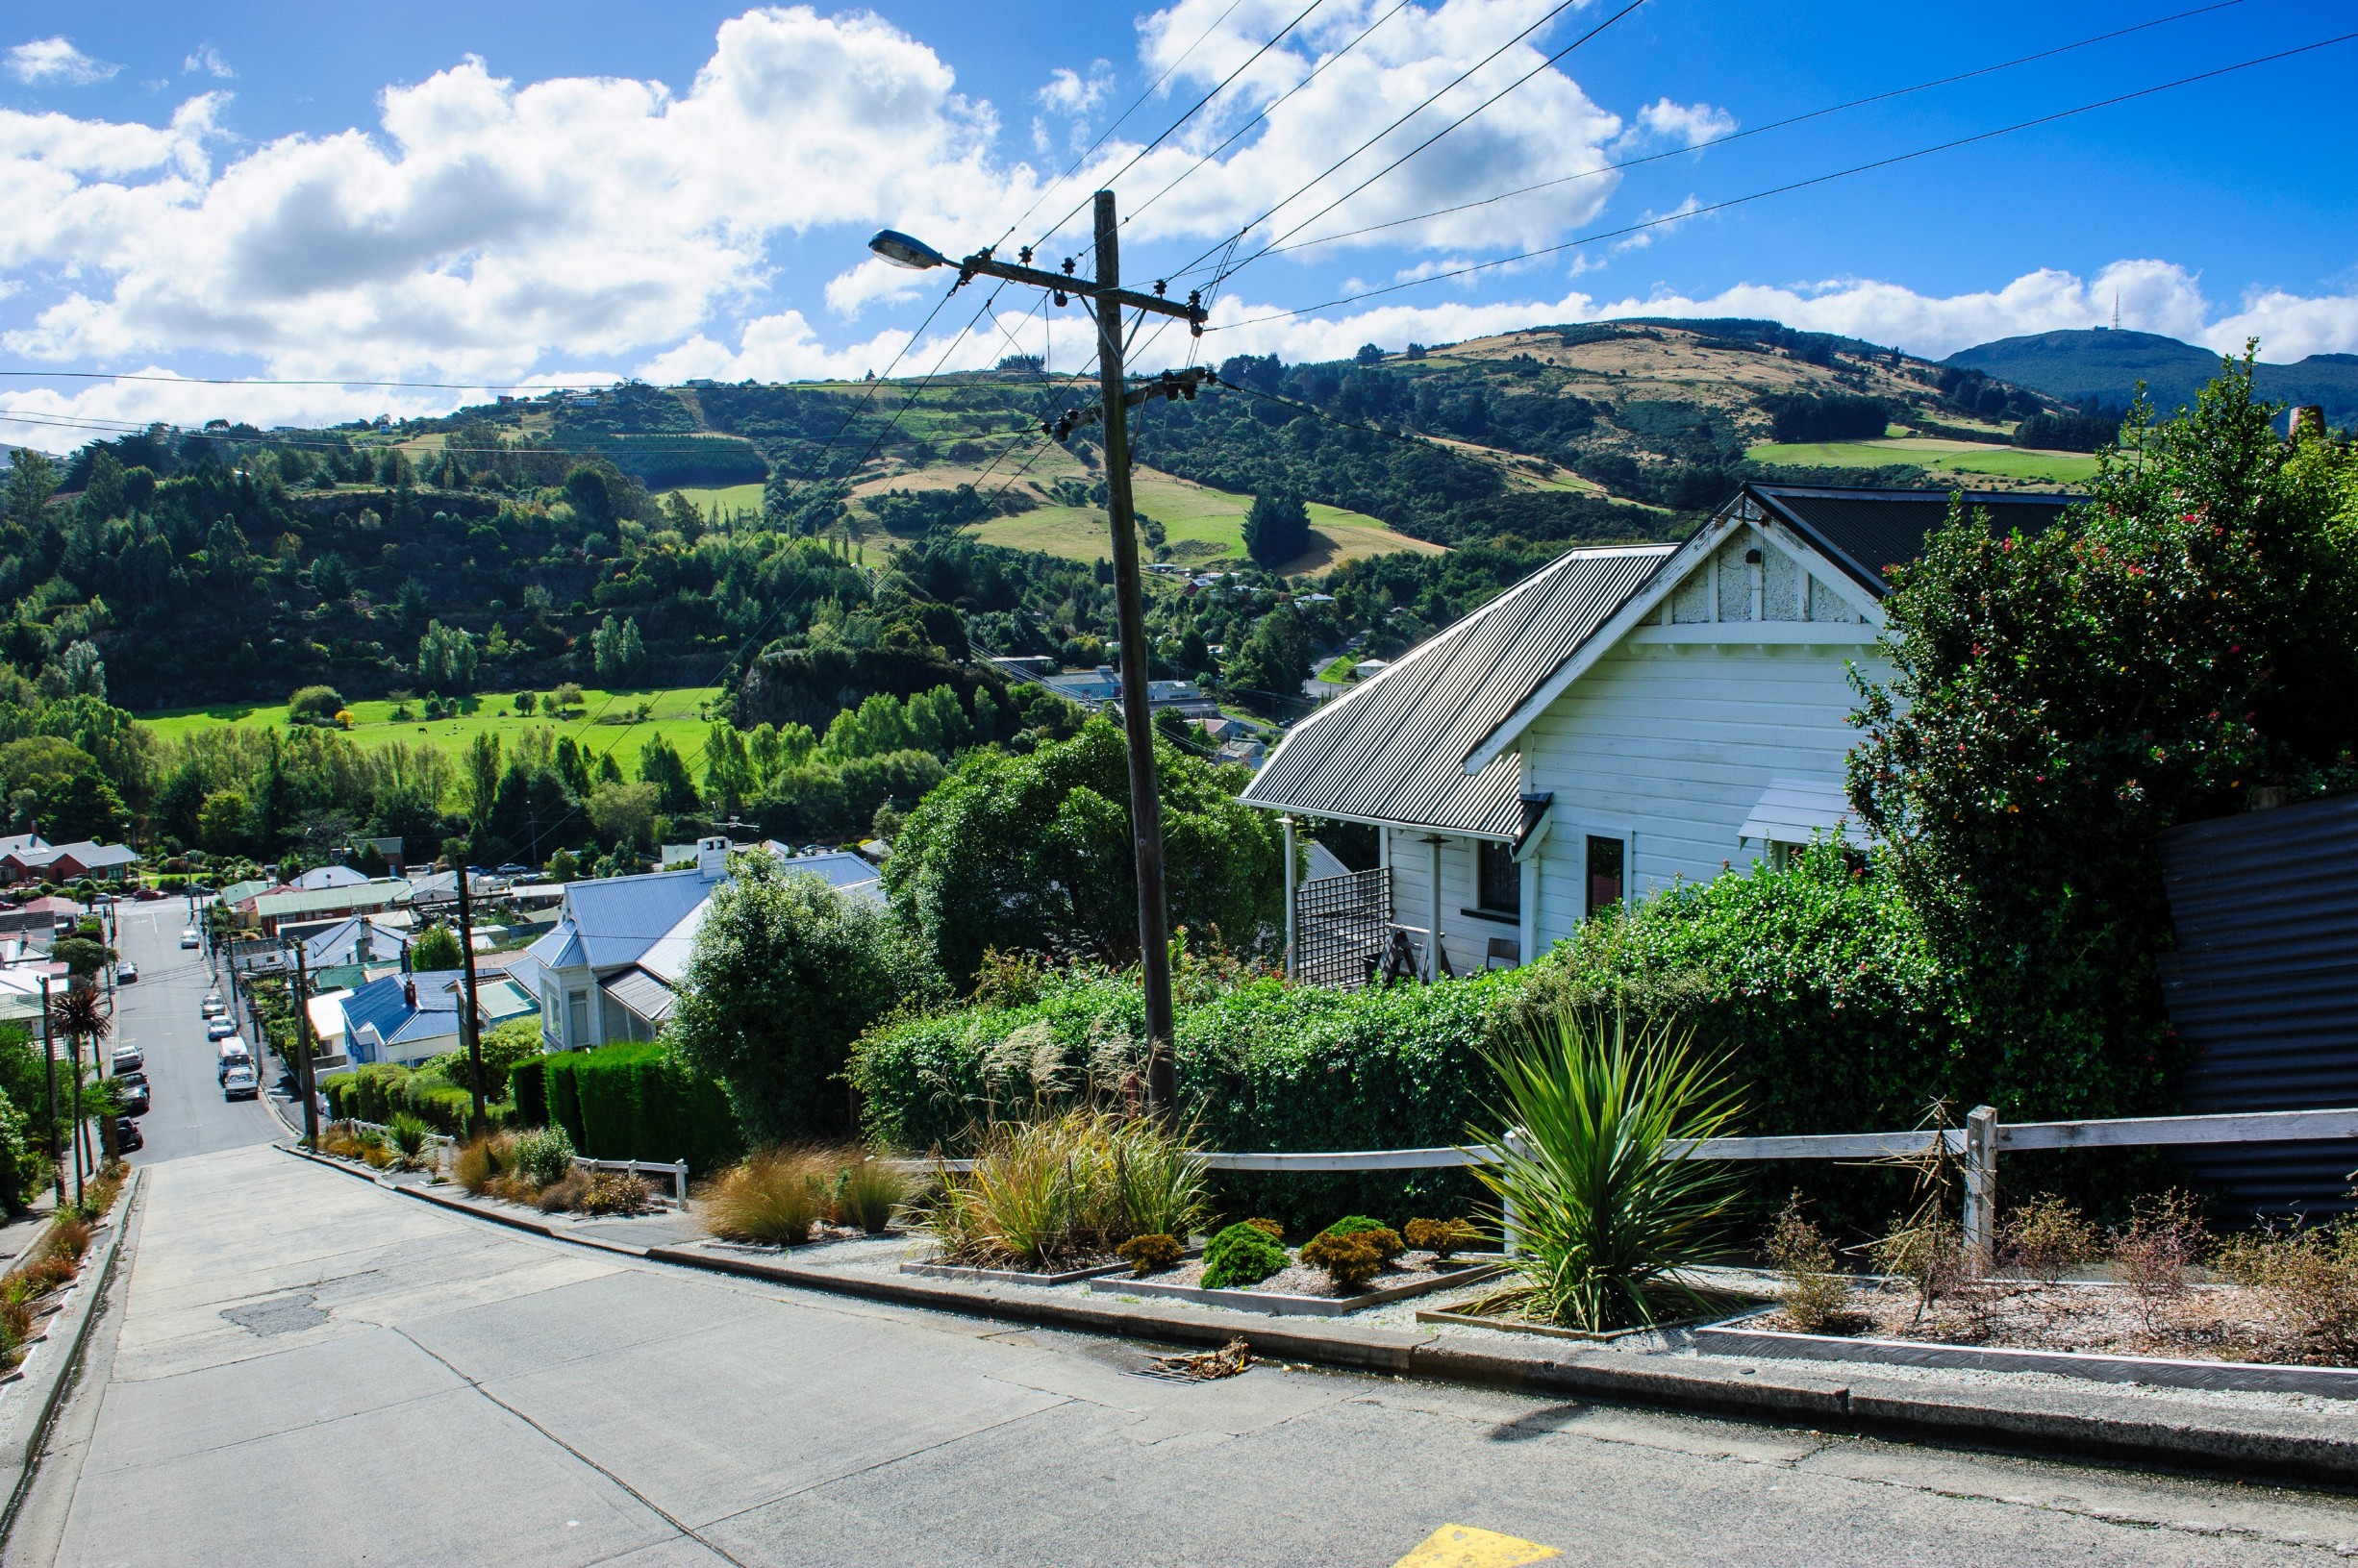 Baldwin Street, the world's steepest residential street, Dunedin, Otago, South Island, New Zealand, Pacific, Image: 201050263, License: Rights-managed, Restrictions: , Model Release: no, Credit line: Michael Runkel / robertharding / Profimedia